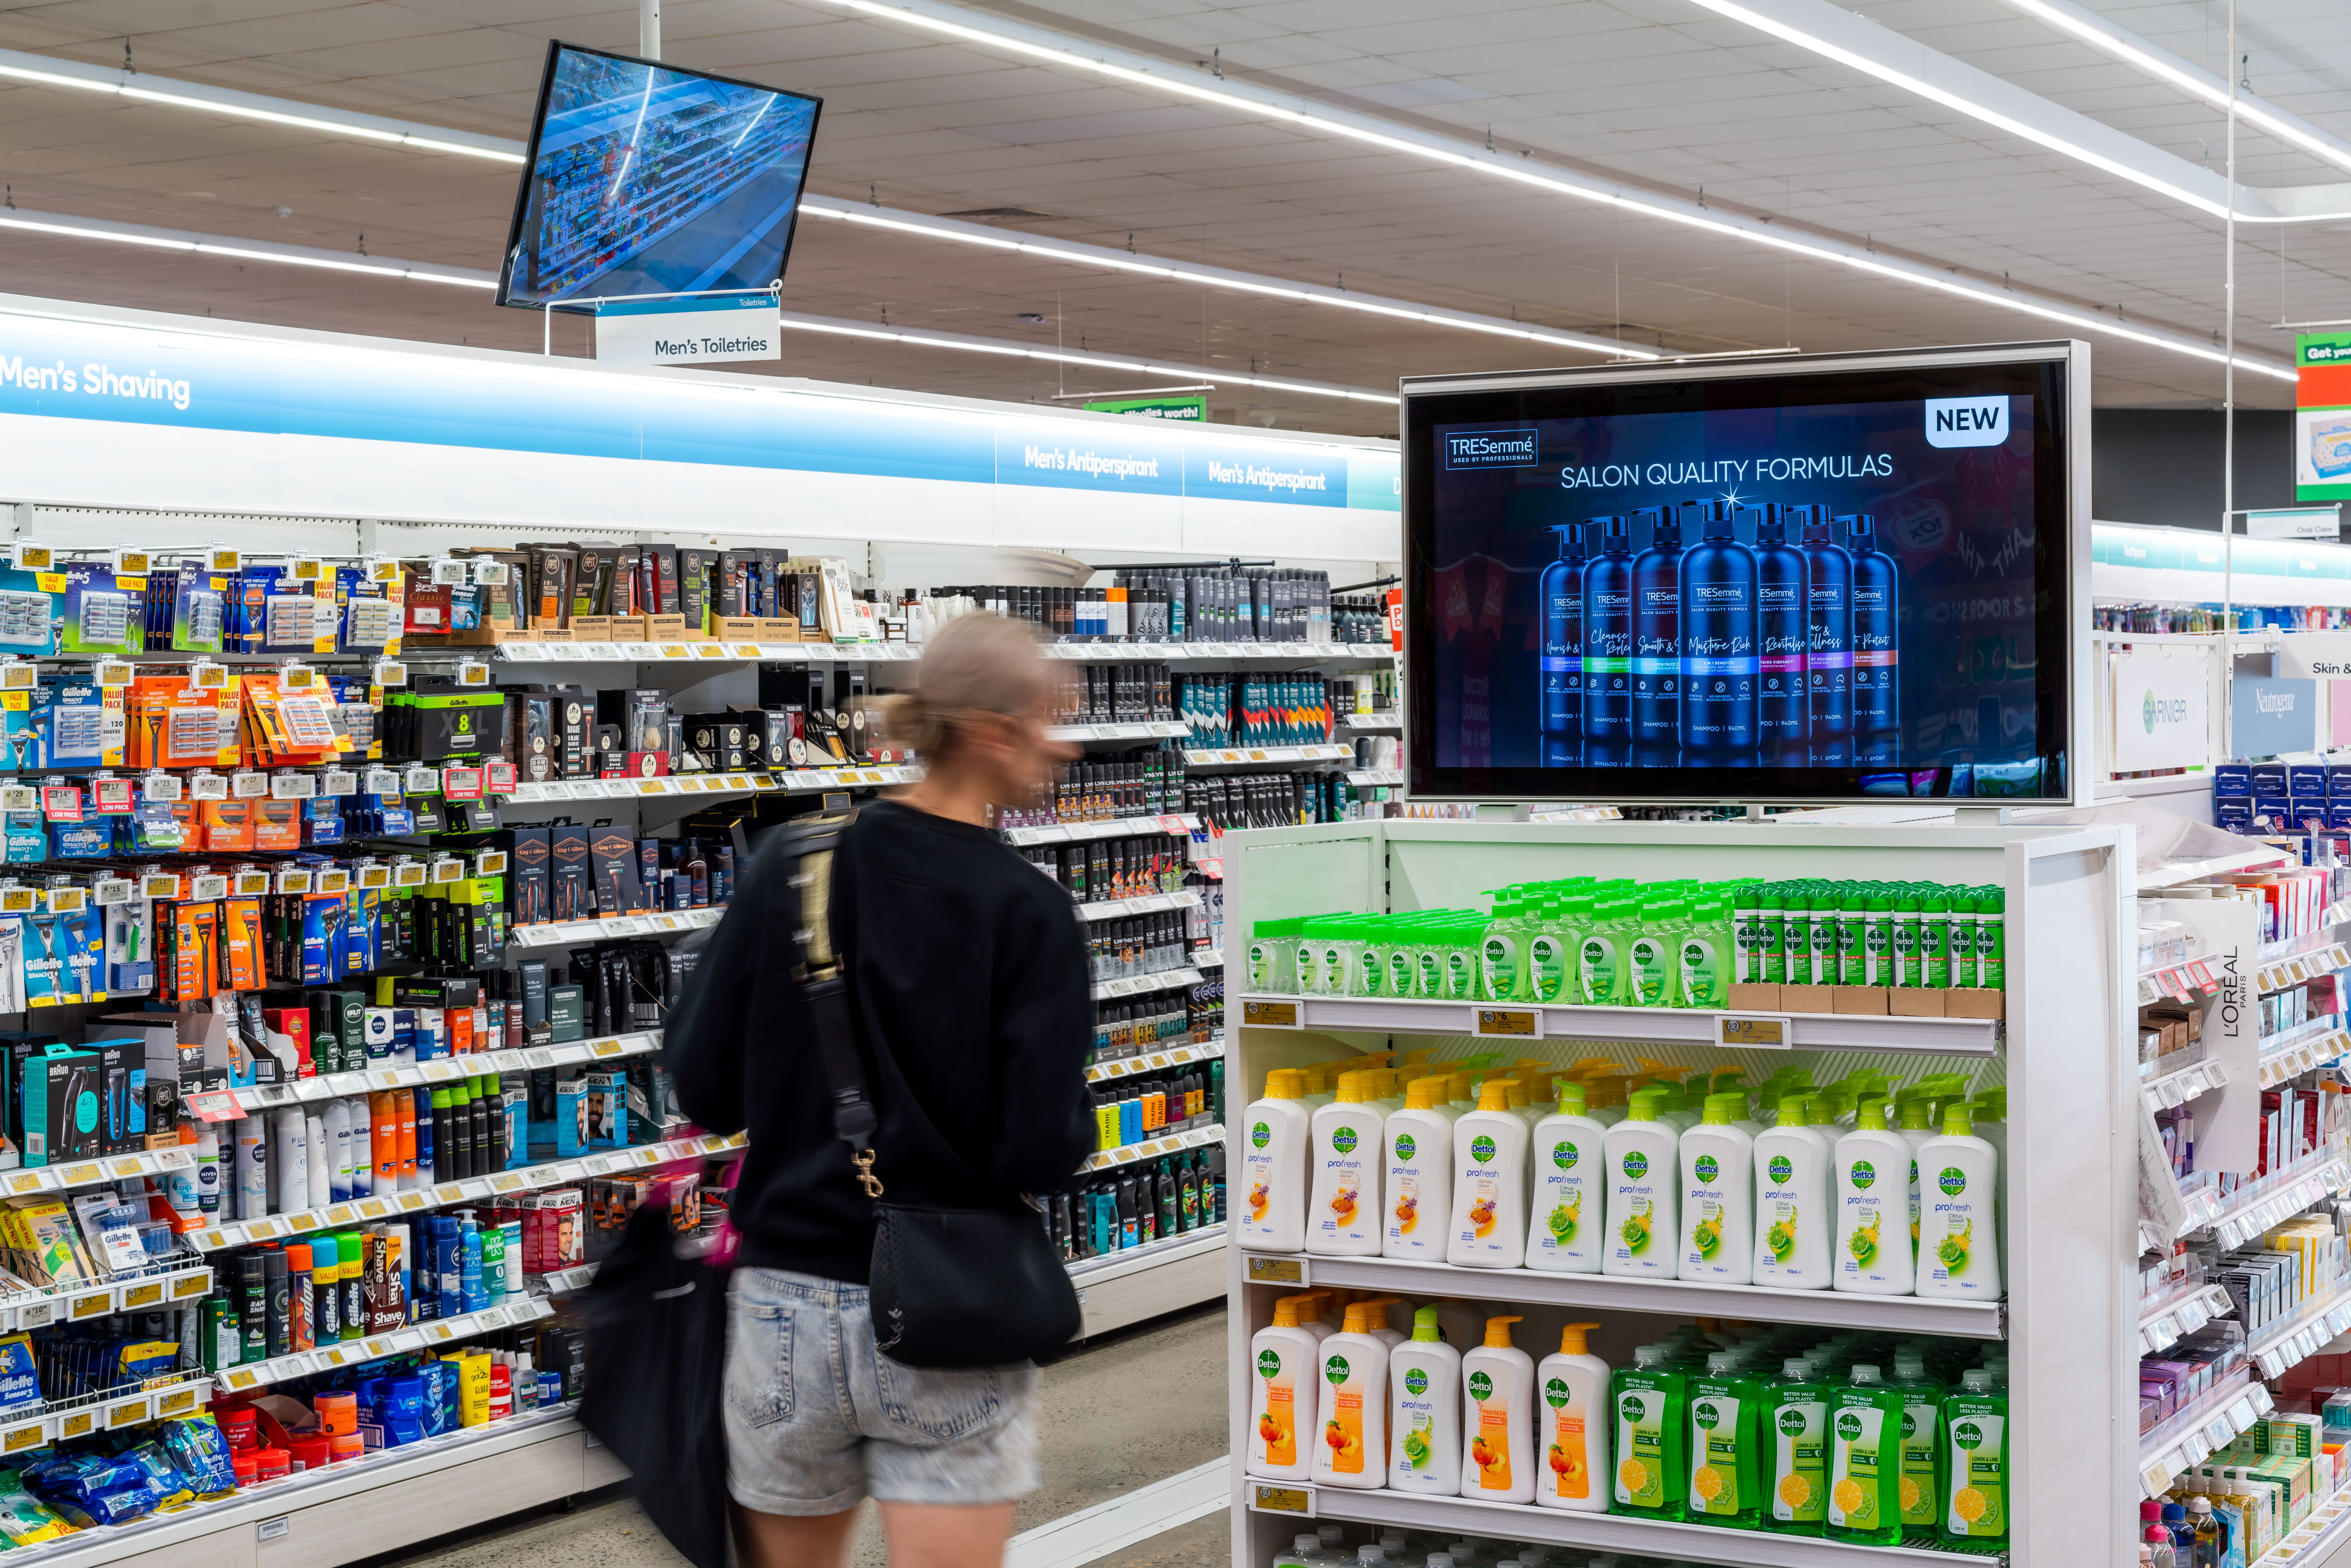 Cartology digitises the in-store experience